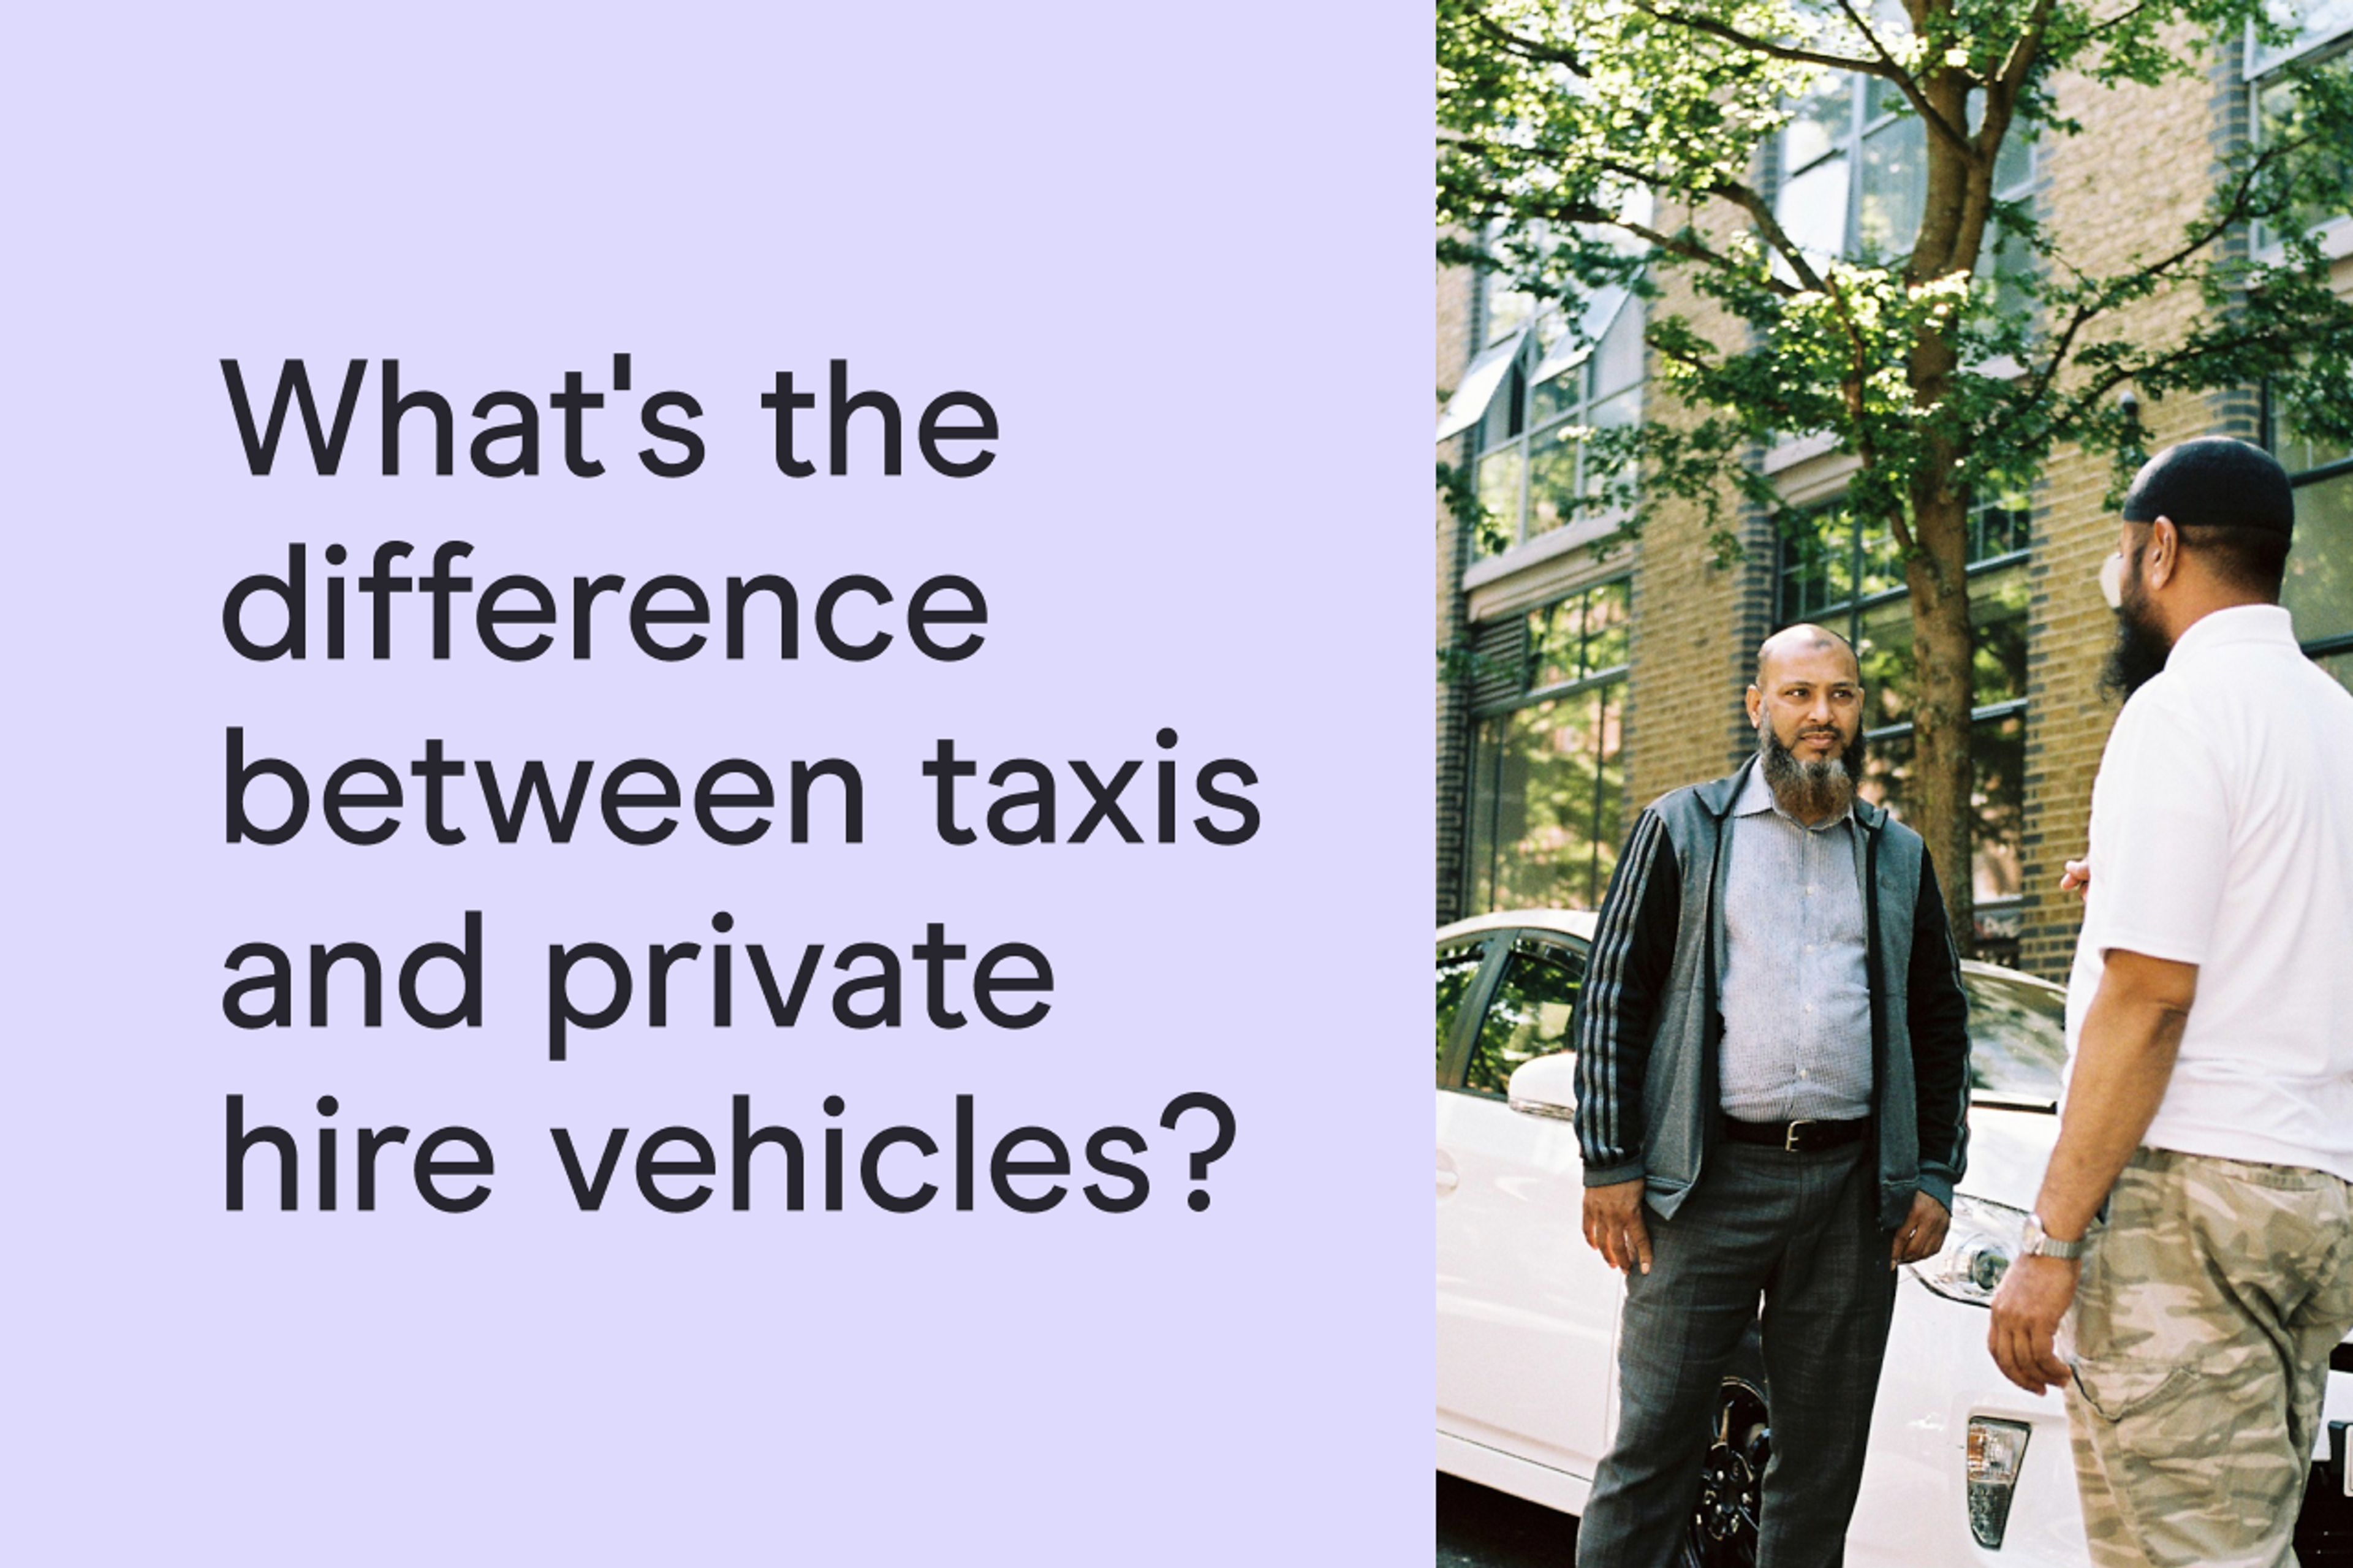 What's the difference between taxis and private hire vehicles?